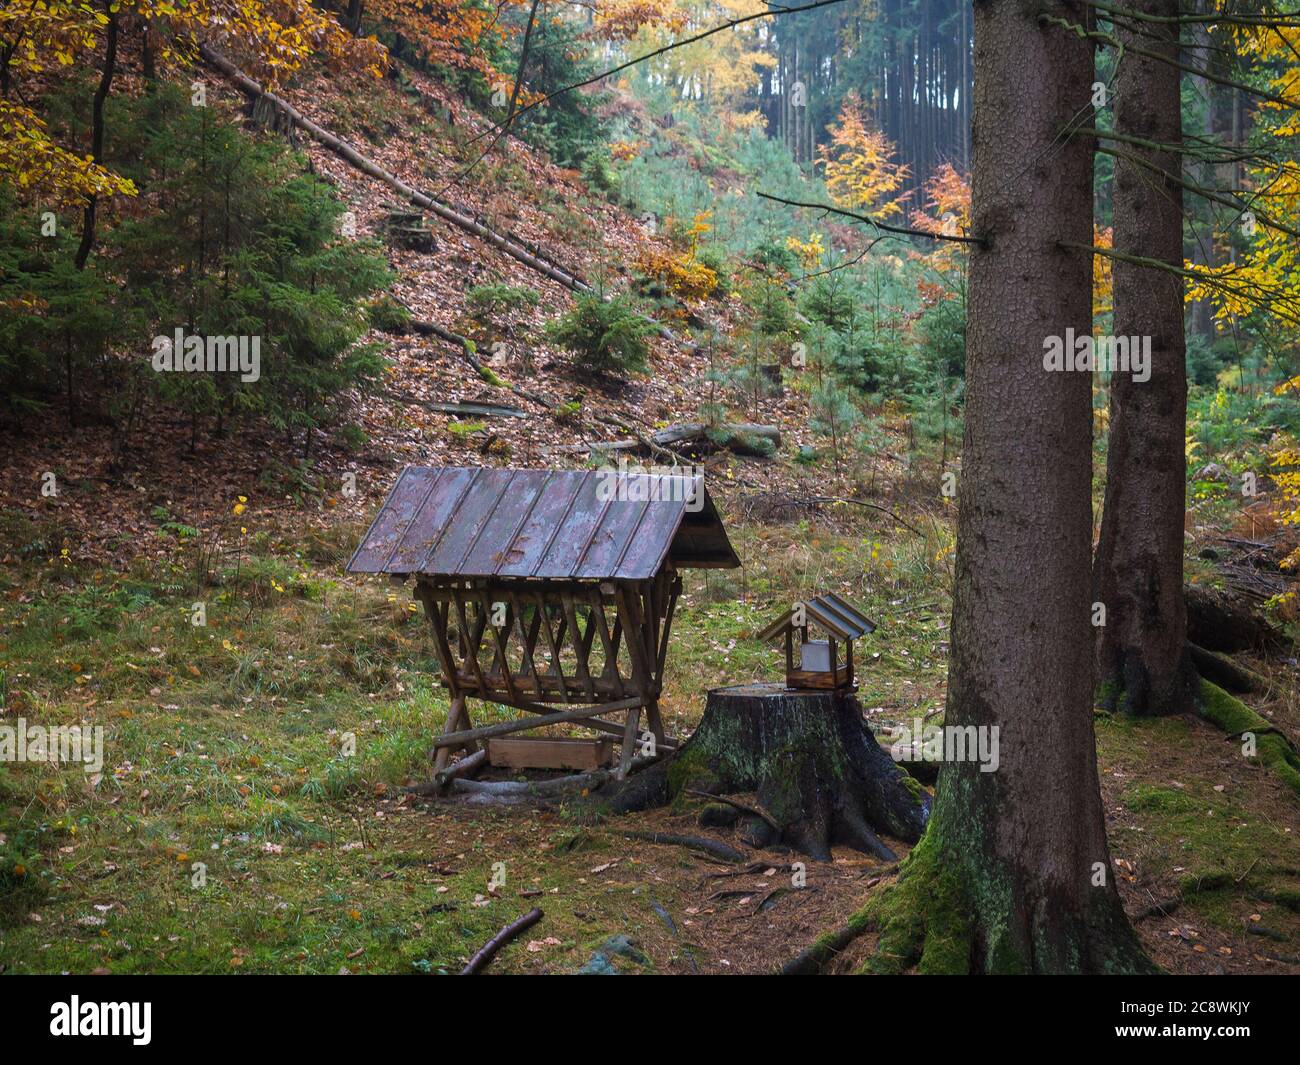 wooden feeder or manger for wild animals in the forest. Feeding trough with hay for wild boars, deer and birds in the atumn forest. Stock Photo